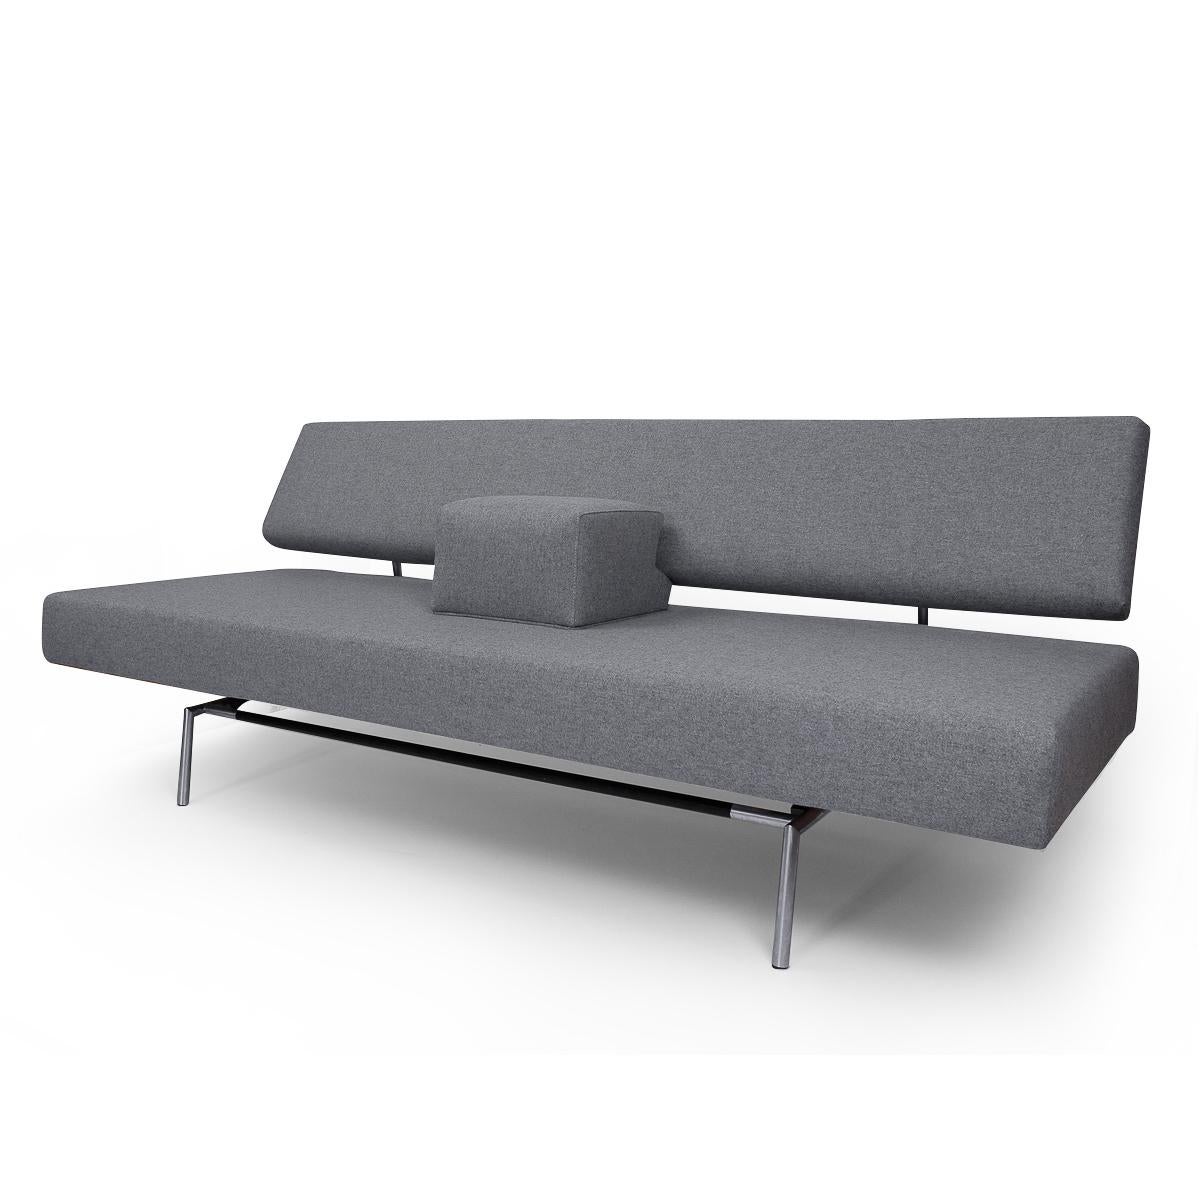 Comfortable, but still Minimalist, daybed designed by Martin Visser for Spectrum (the Netherlands) during the 1960s. Features a metal tubular frame, new grey wool upholstery and foam, and comes with an armrest in the same grey wool fabric.

The